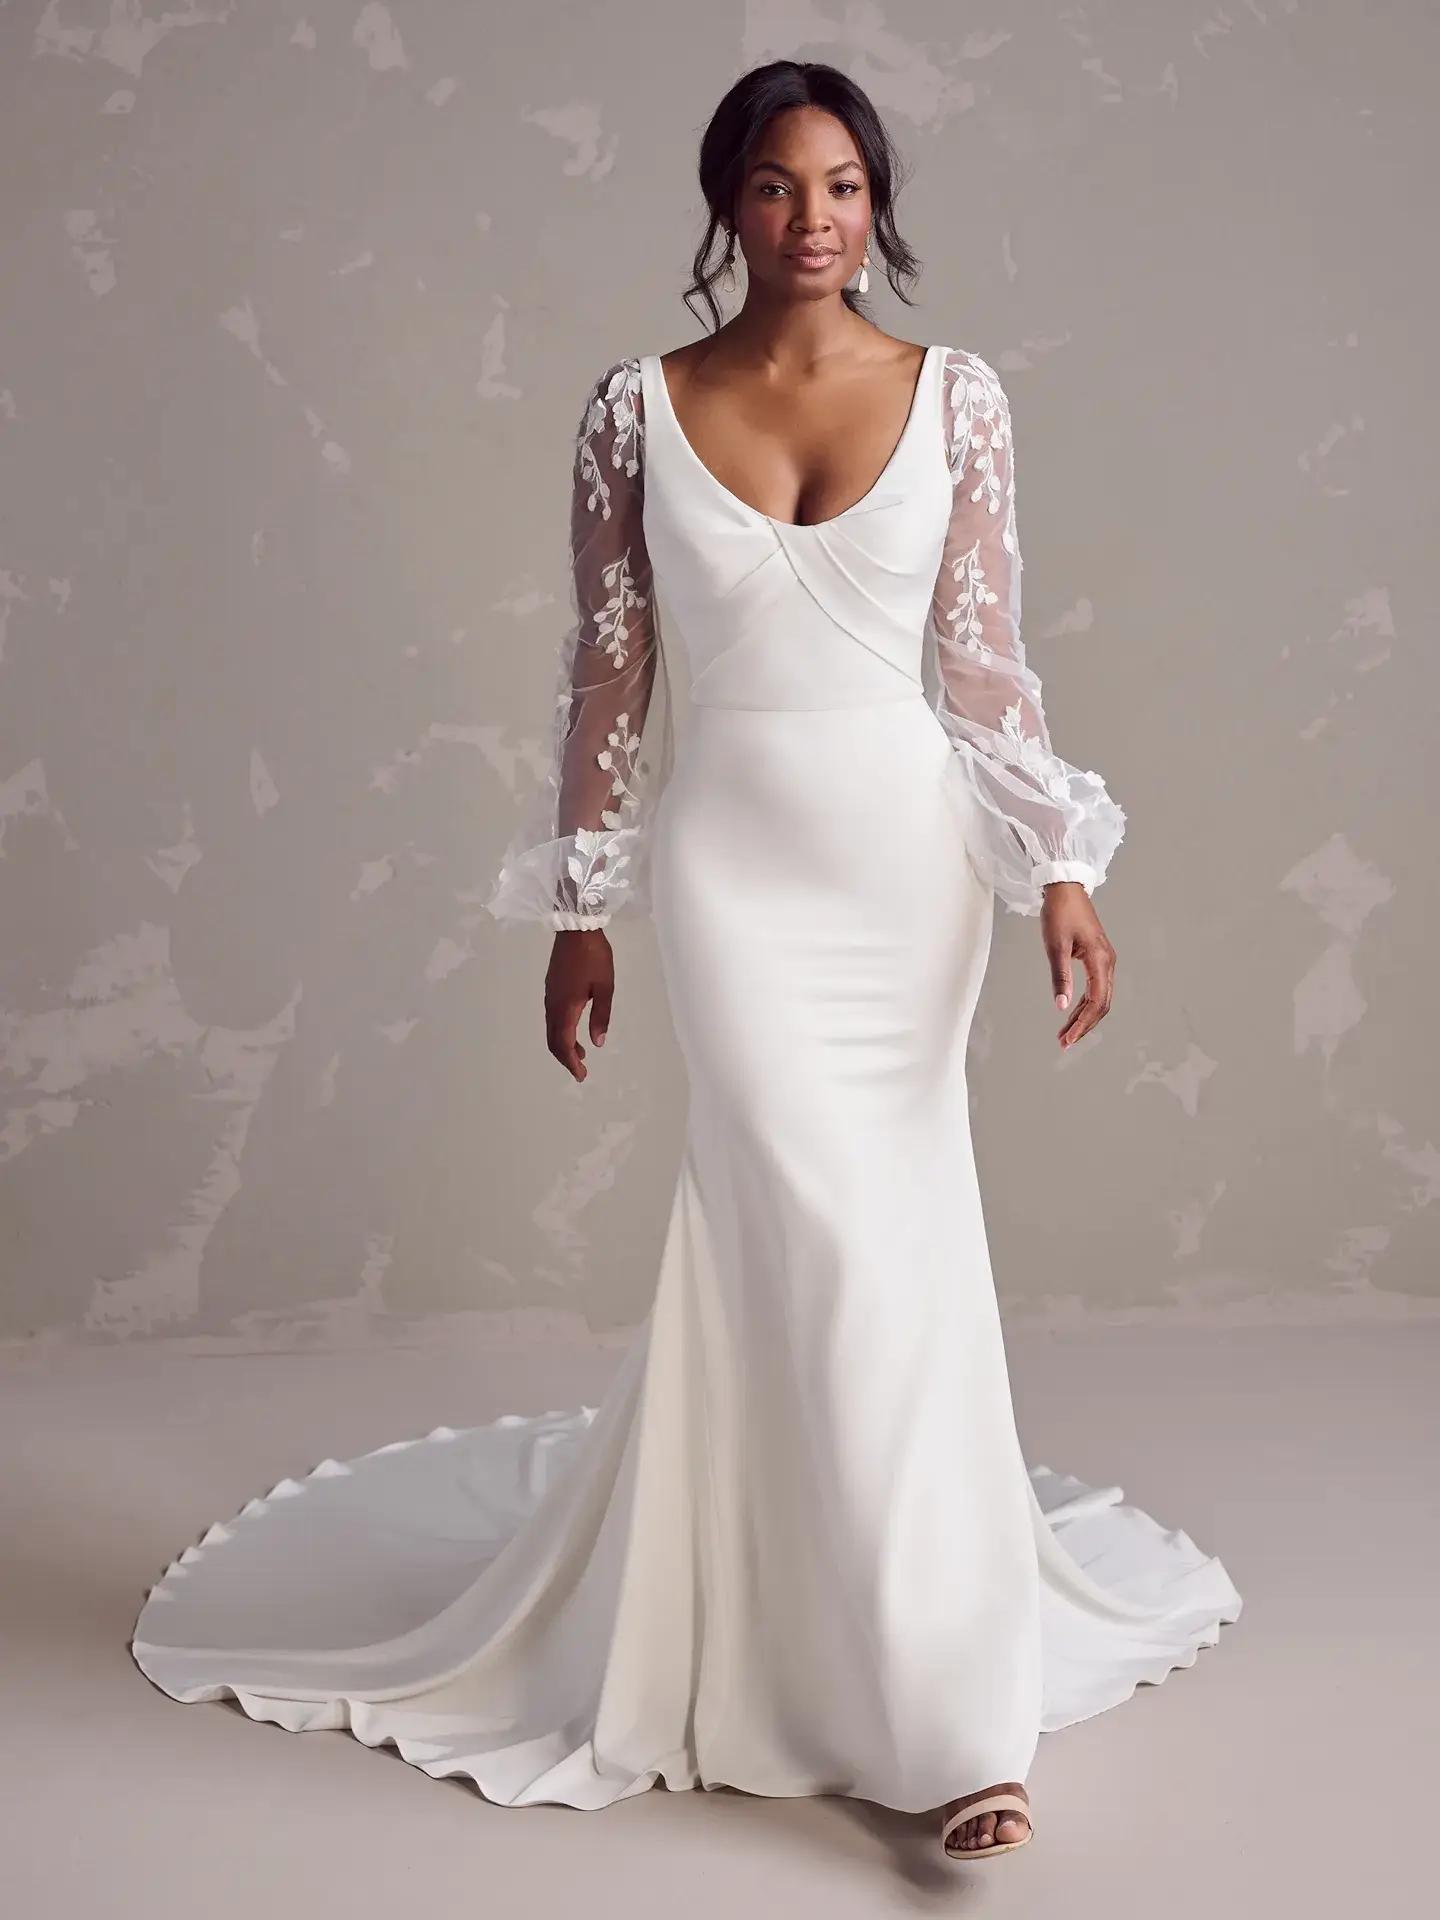 Discover the Latest Designer Wedding Gowns at Ever After Bridal Image